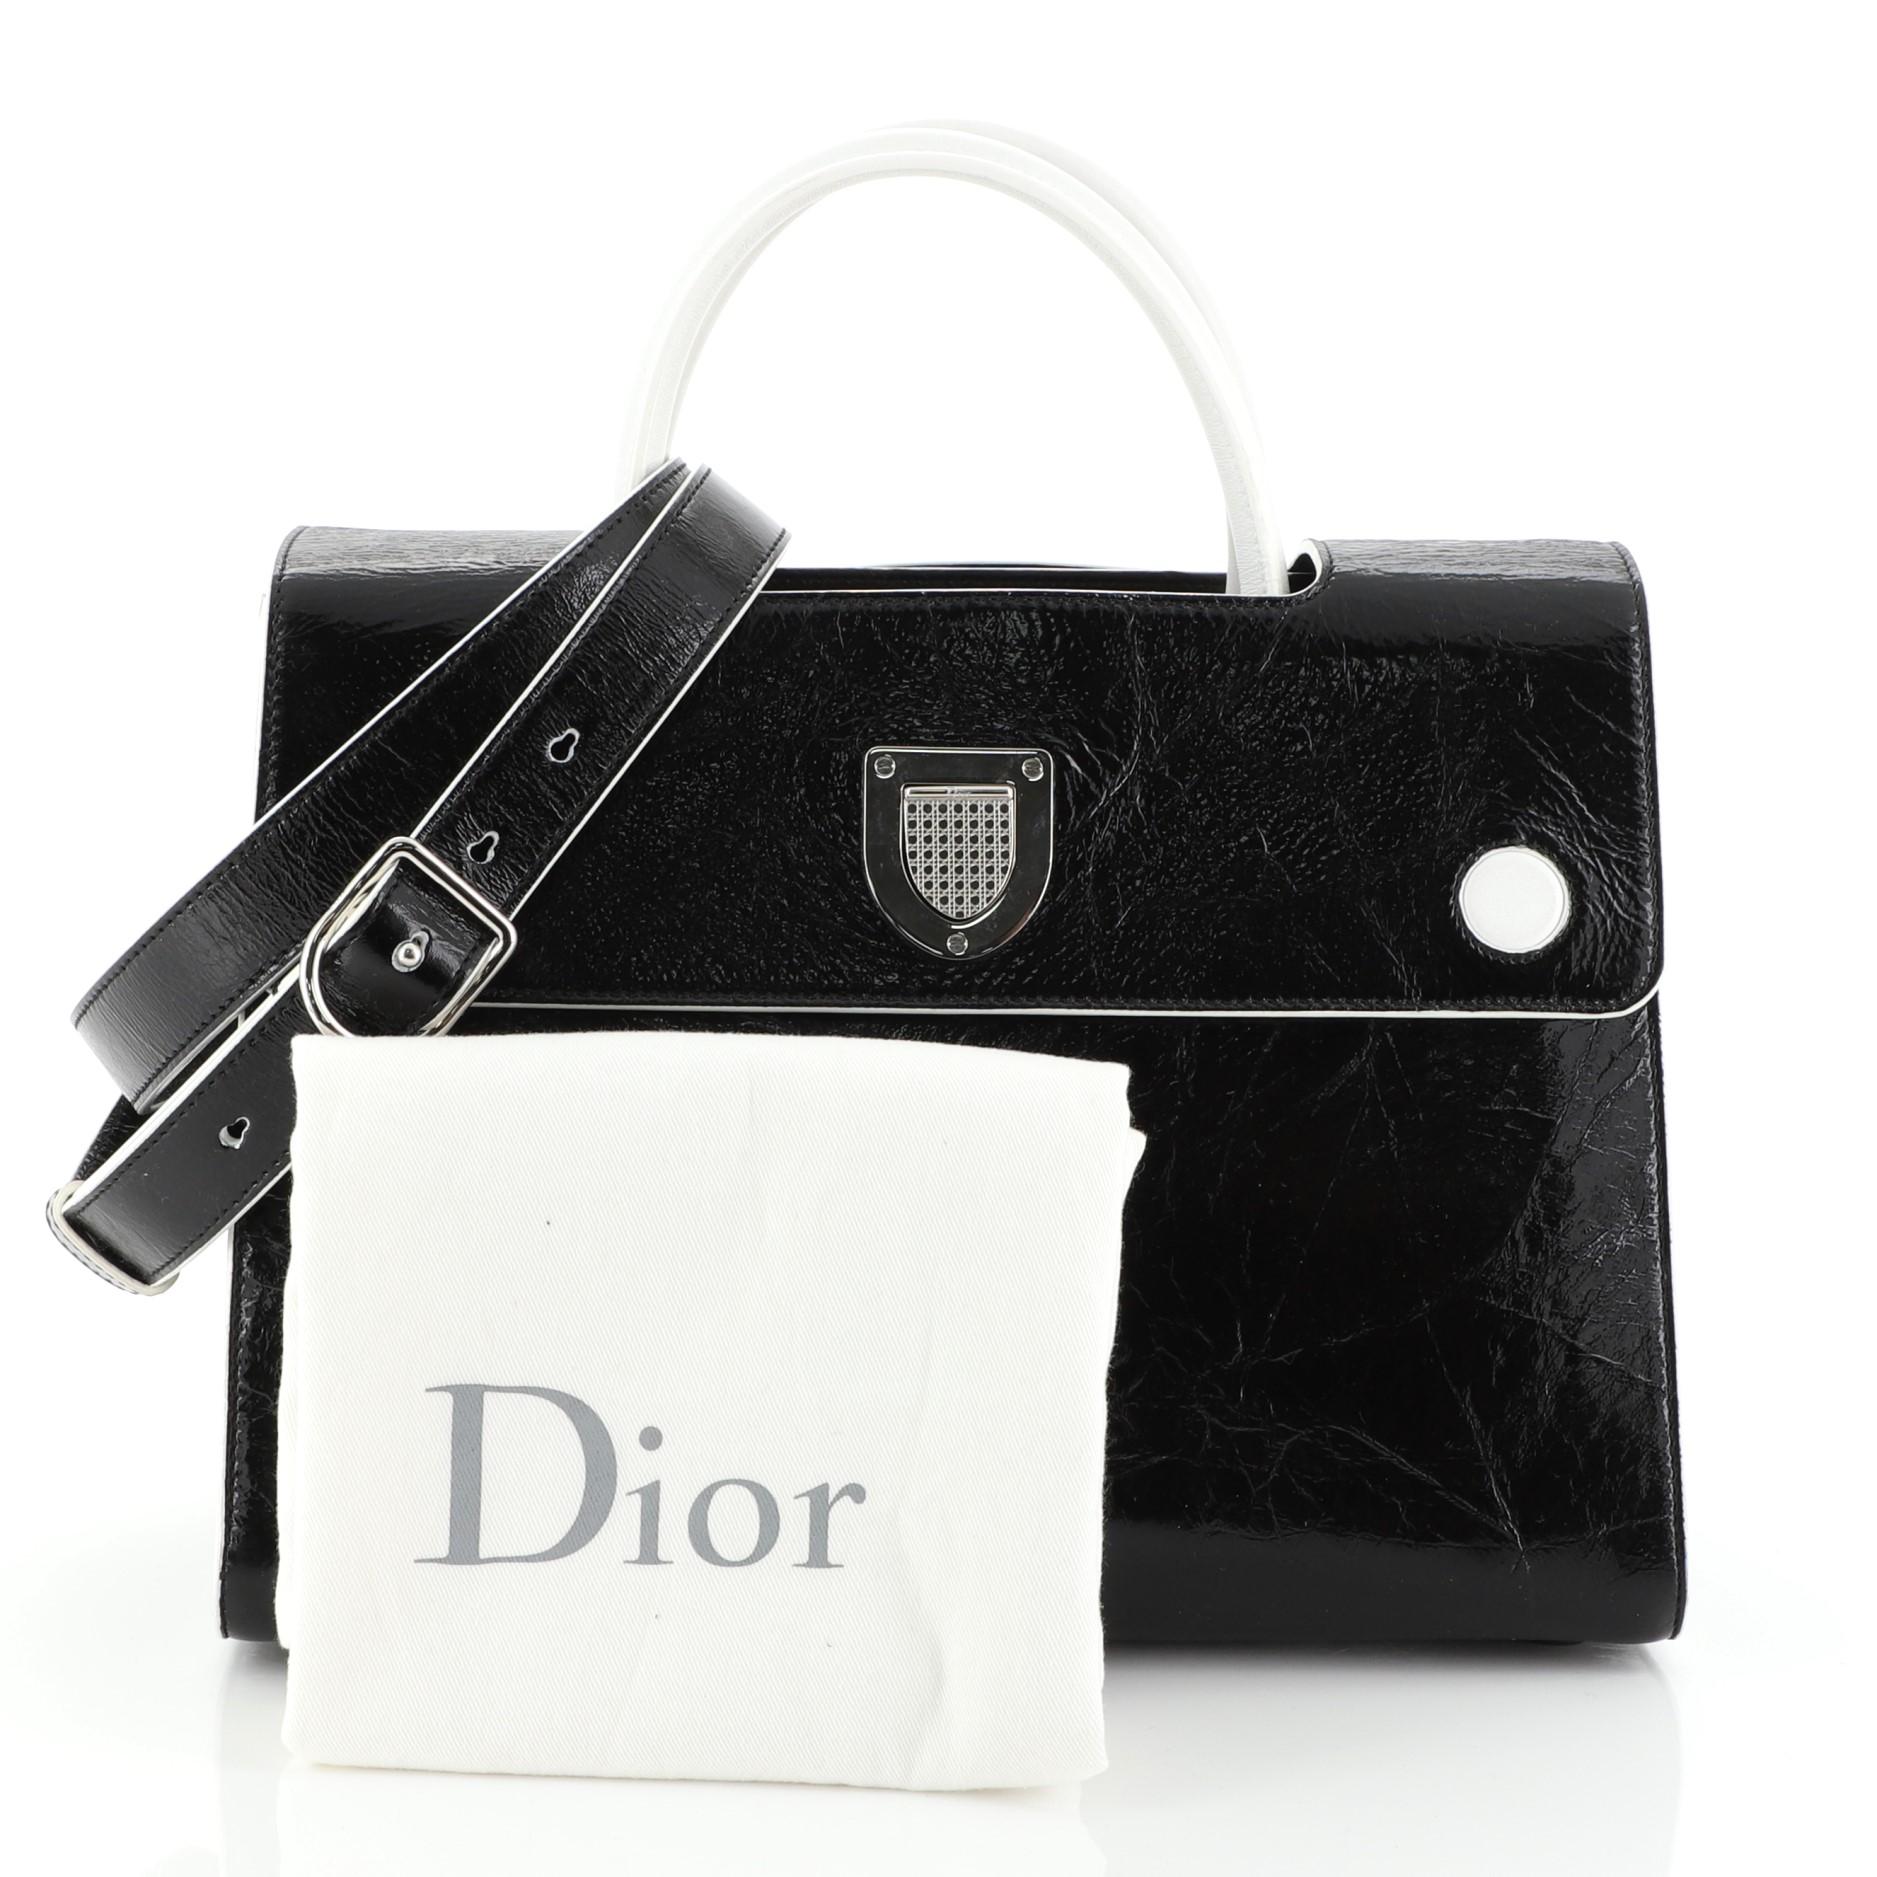 This Christian Dior Diorever Handbag Leather Medium, crafted in black leather, features a reversible flap, dual rolled leather handles, protective base studs and silver-tone hardware. Its crest-shaped clasp closure opens to a black leather interior